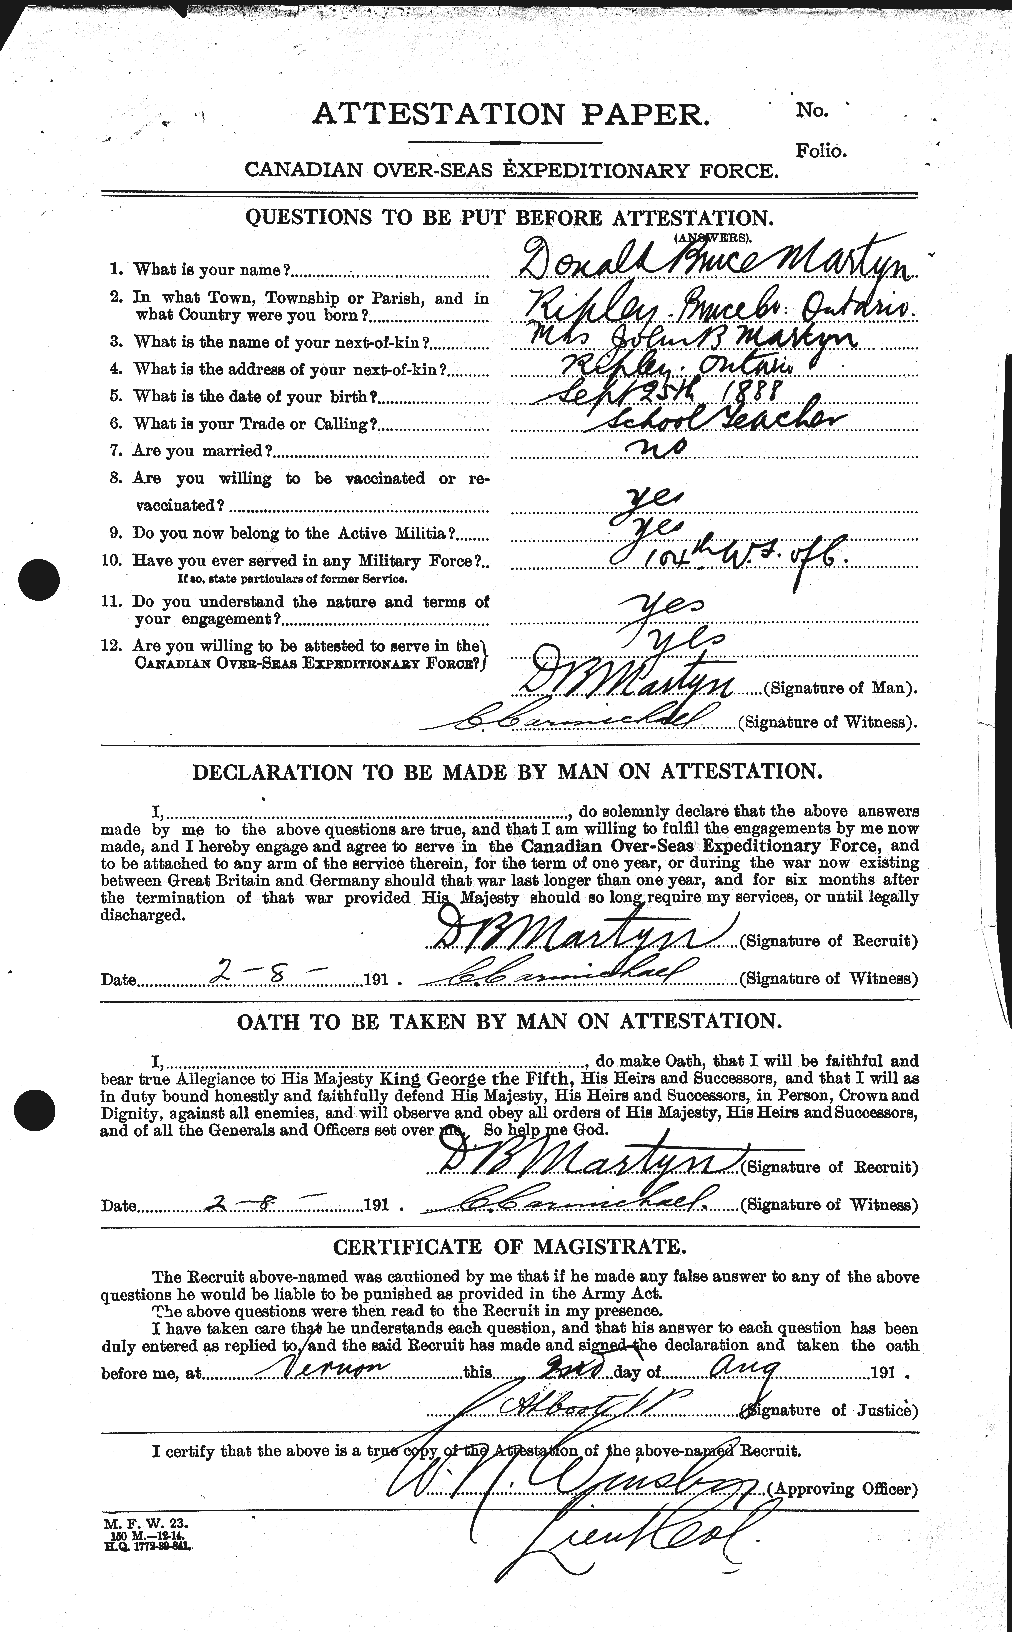 Personnel Records of the First World War - CEF 486046a